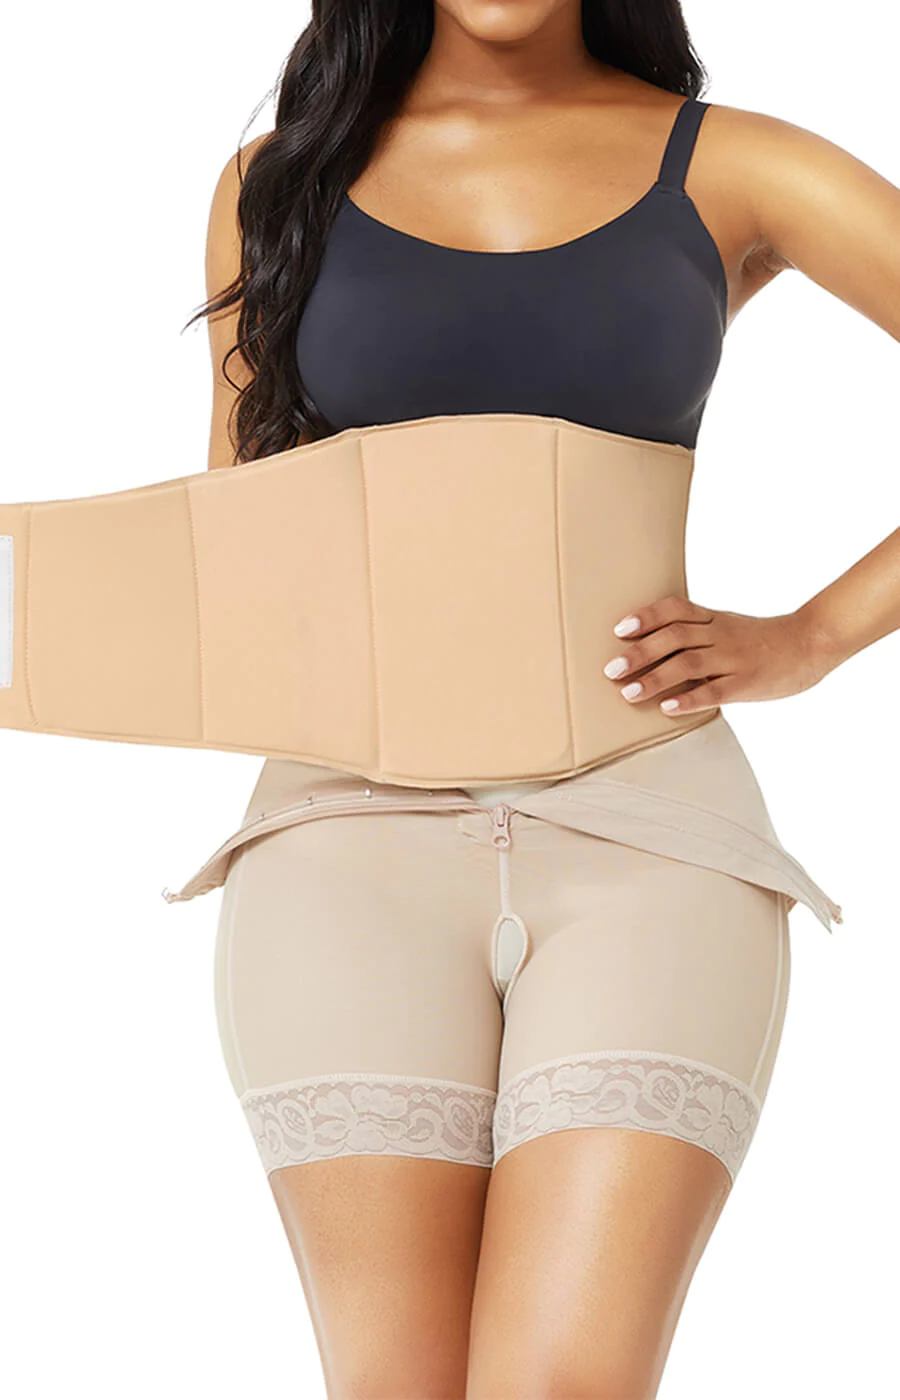 Best Rated and Reviewed in Waist Shapers 